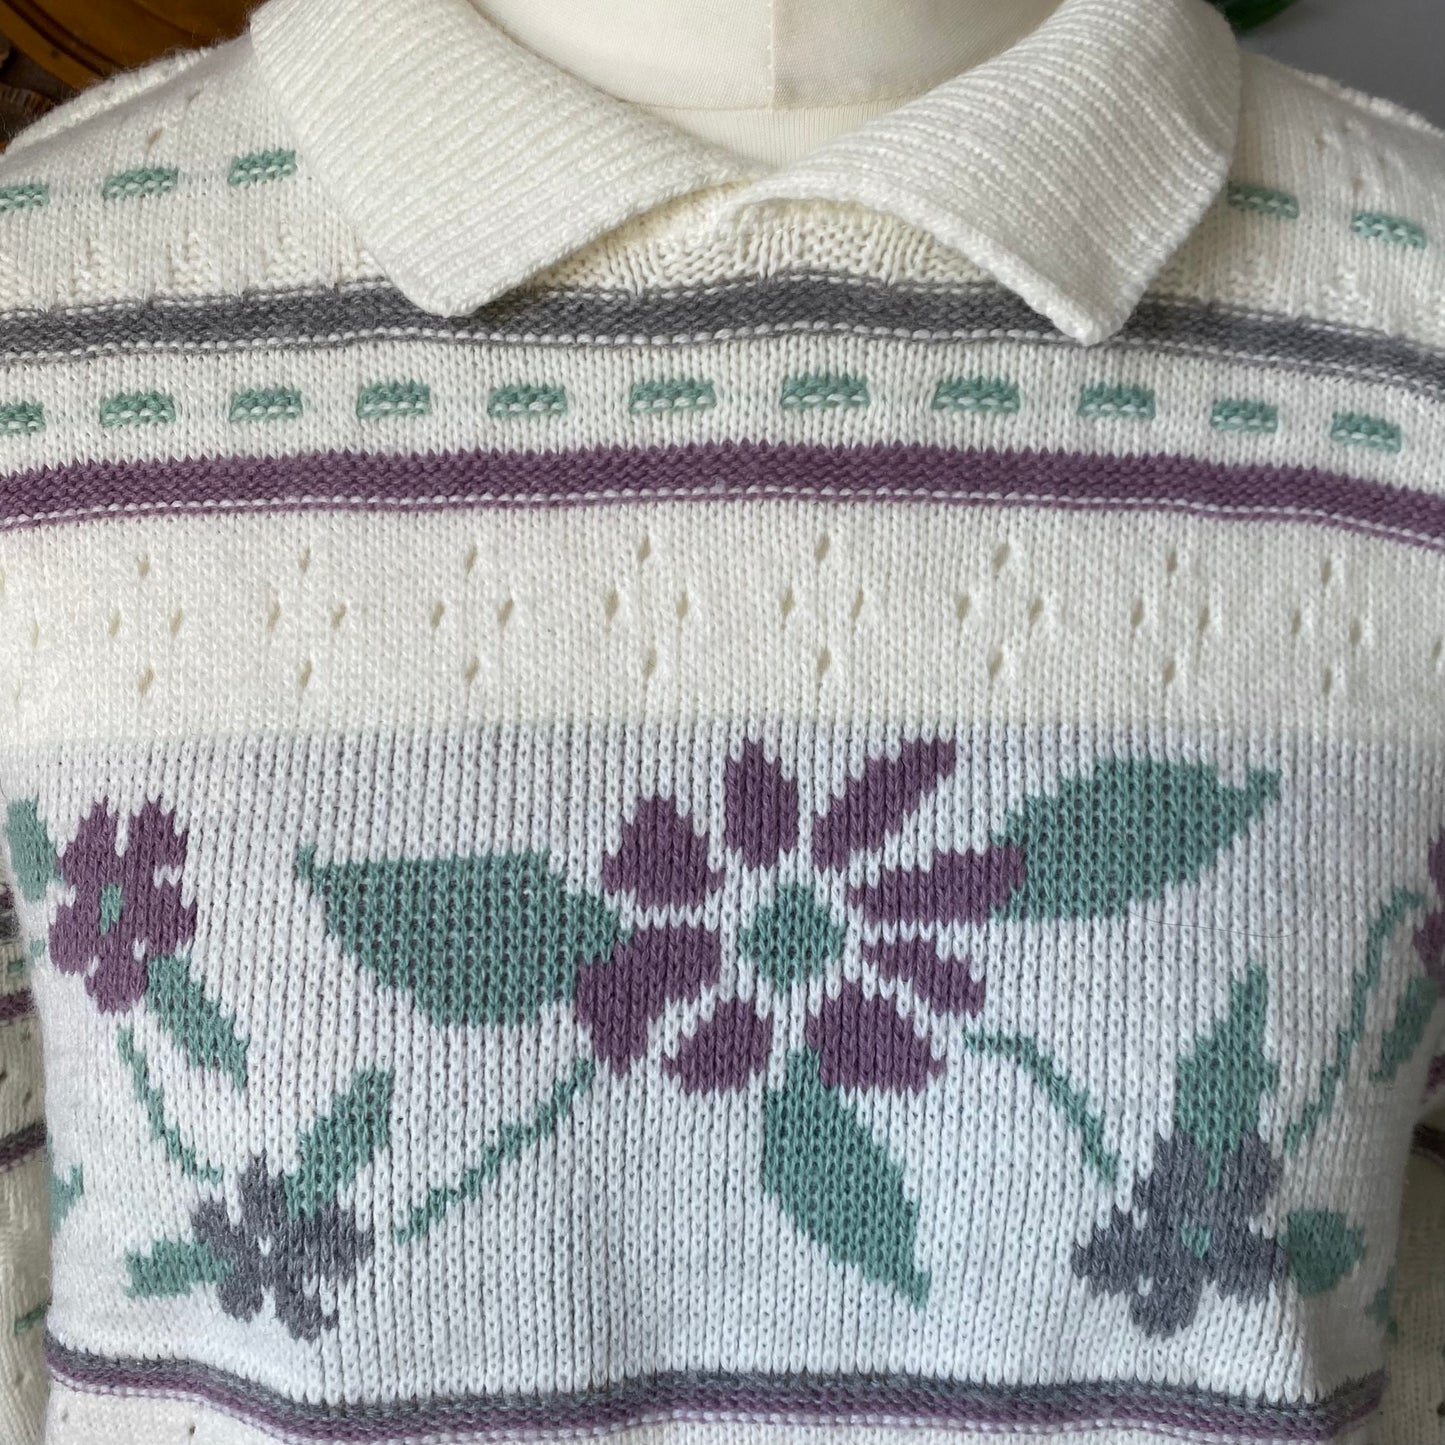 80s soft pastel collared lightweight floral jumper. Approx UK size 12-18